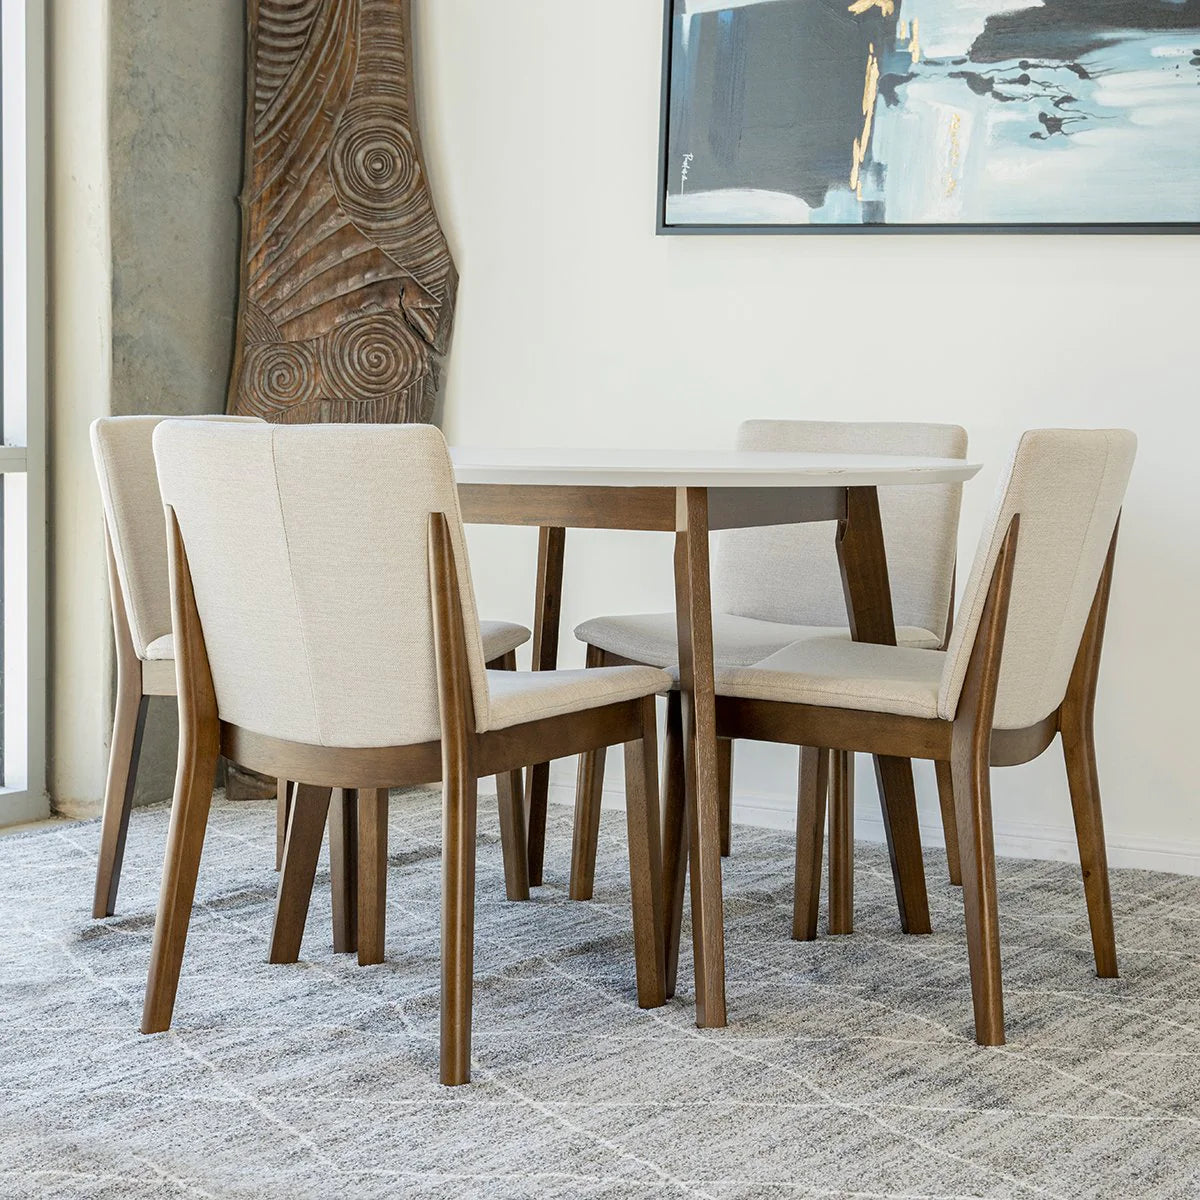 Aliana Dining set with 4 Virginia Beige Chairs (White)